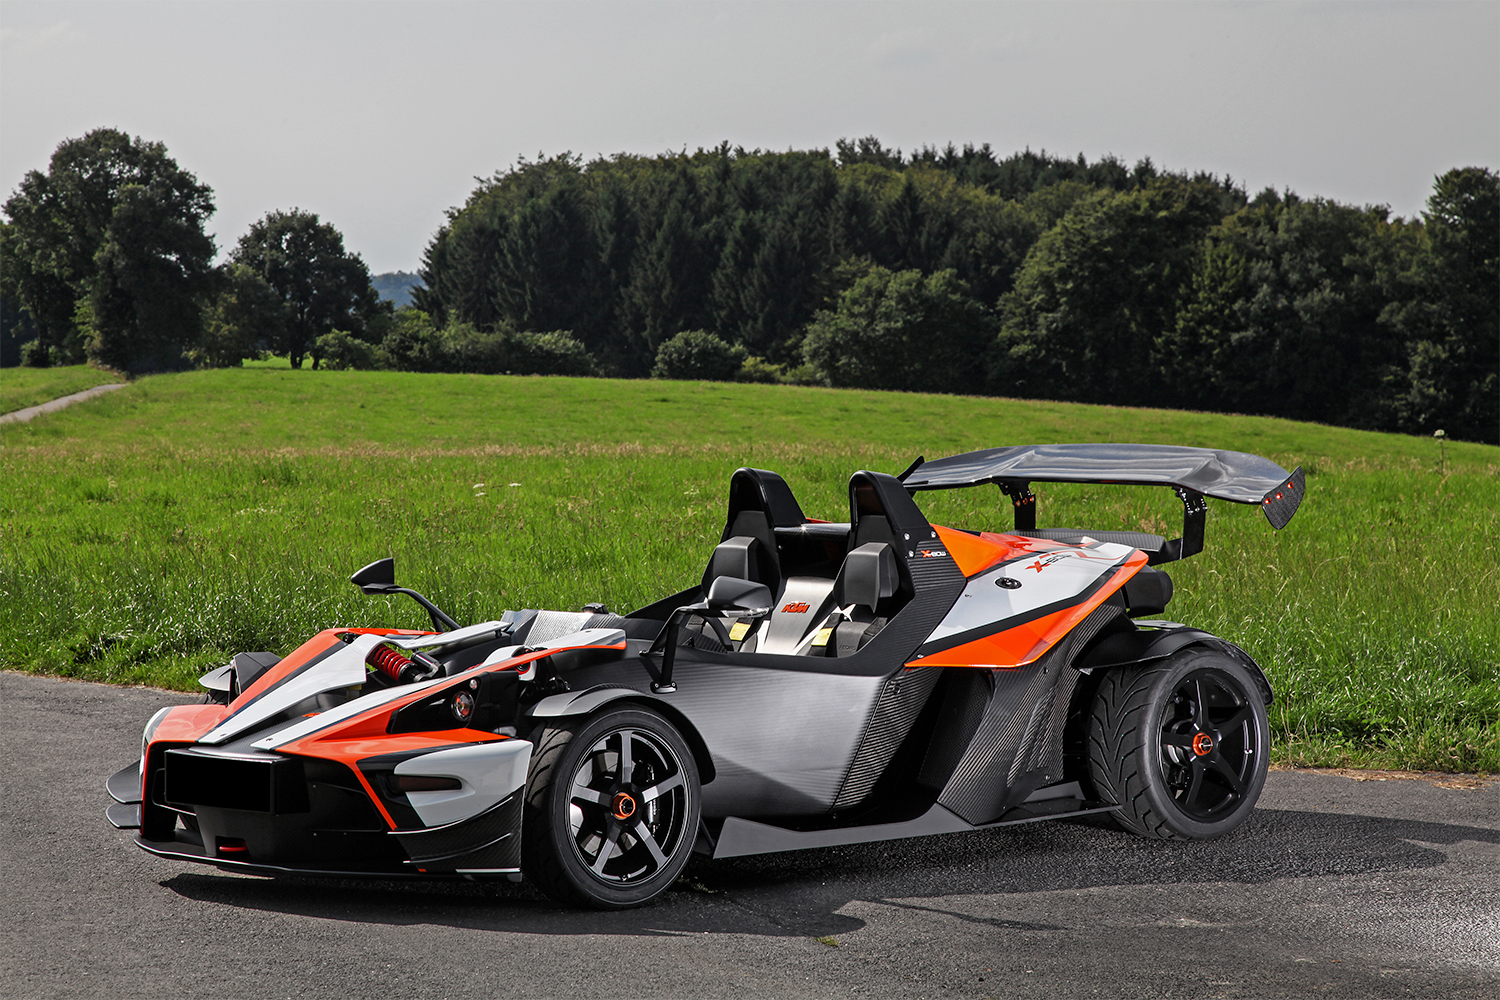 Wimmer-RST KTM X-Bow GT parked on pavement near a green open field.